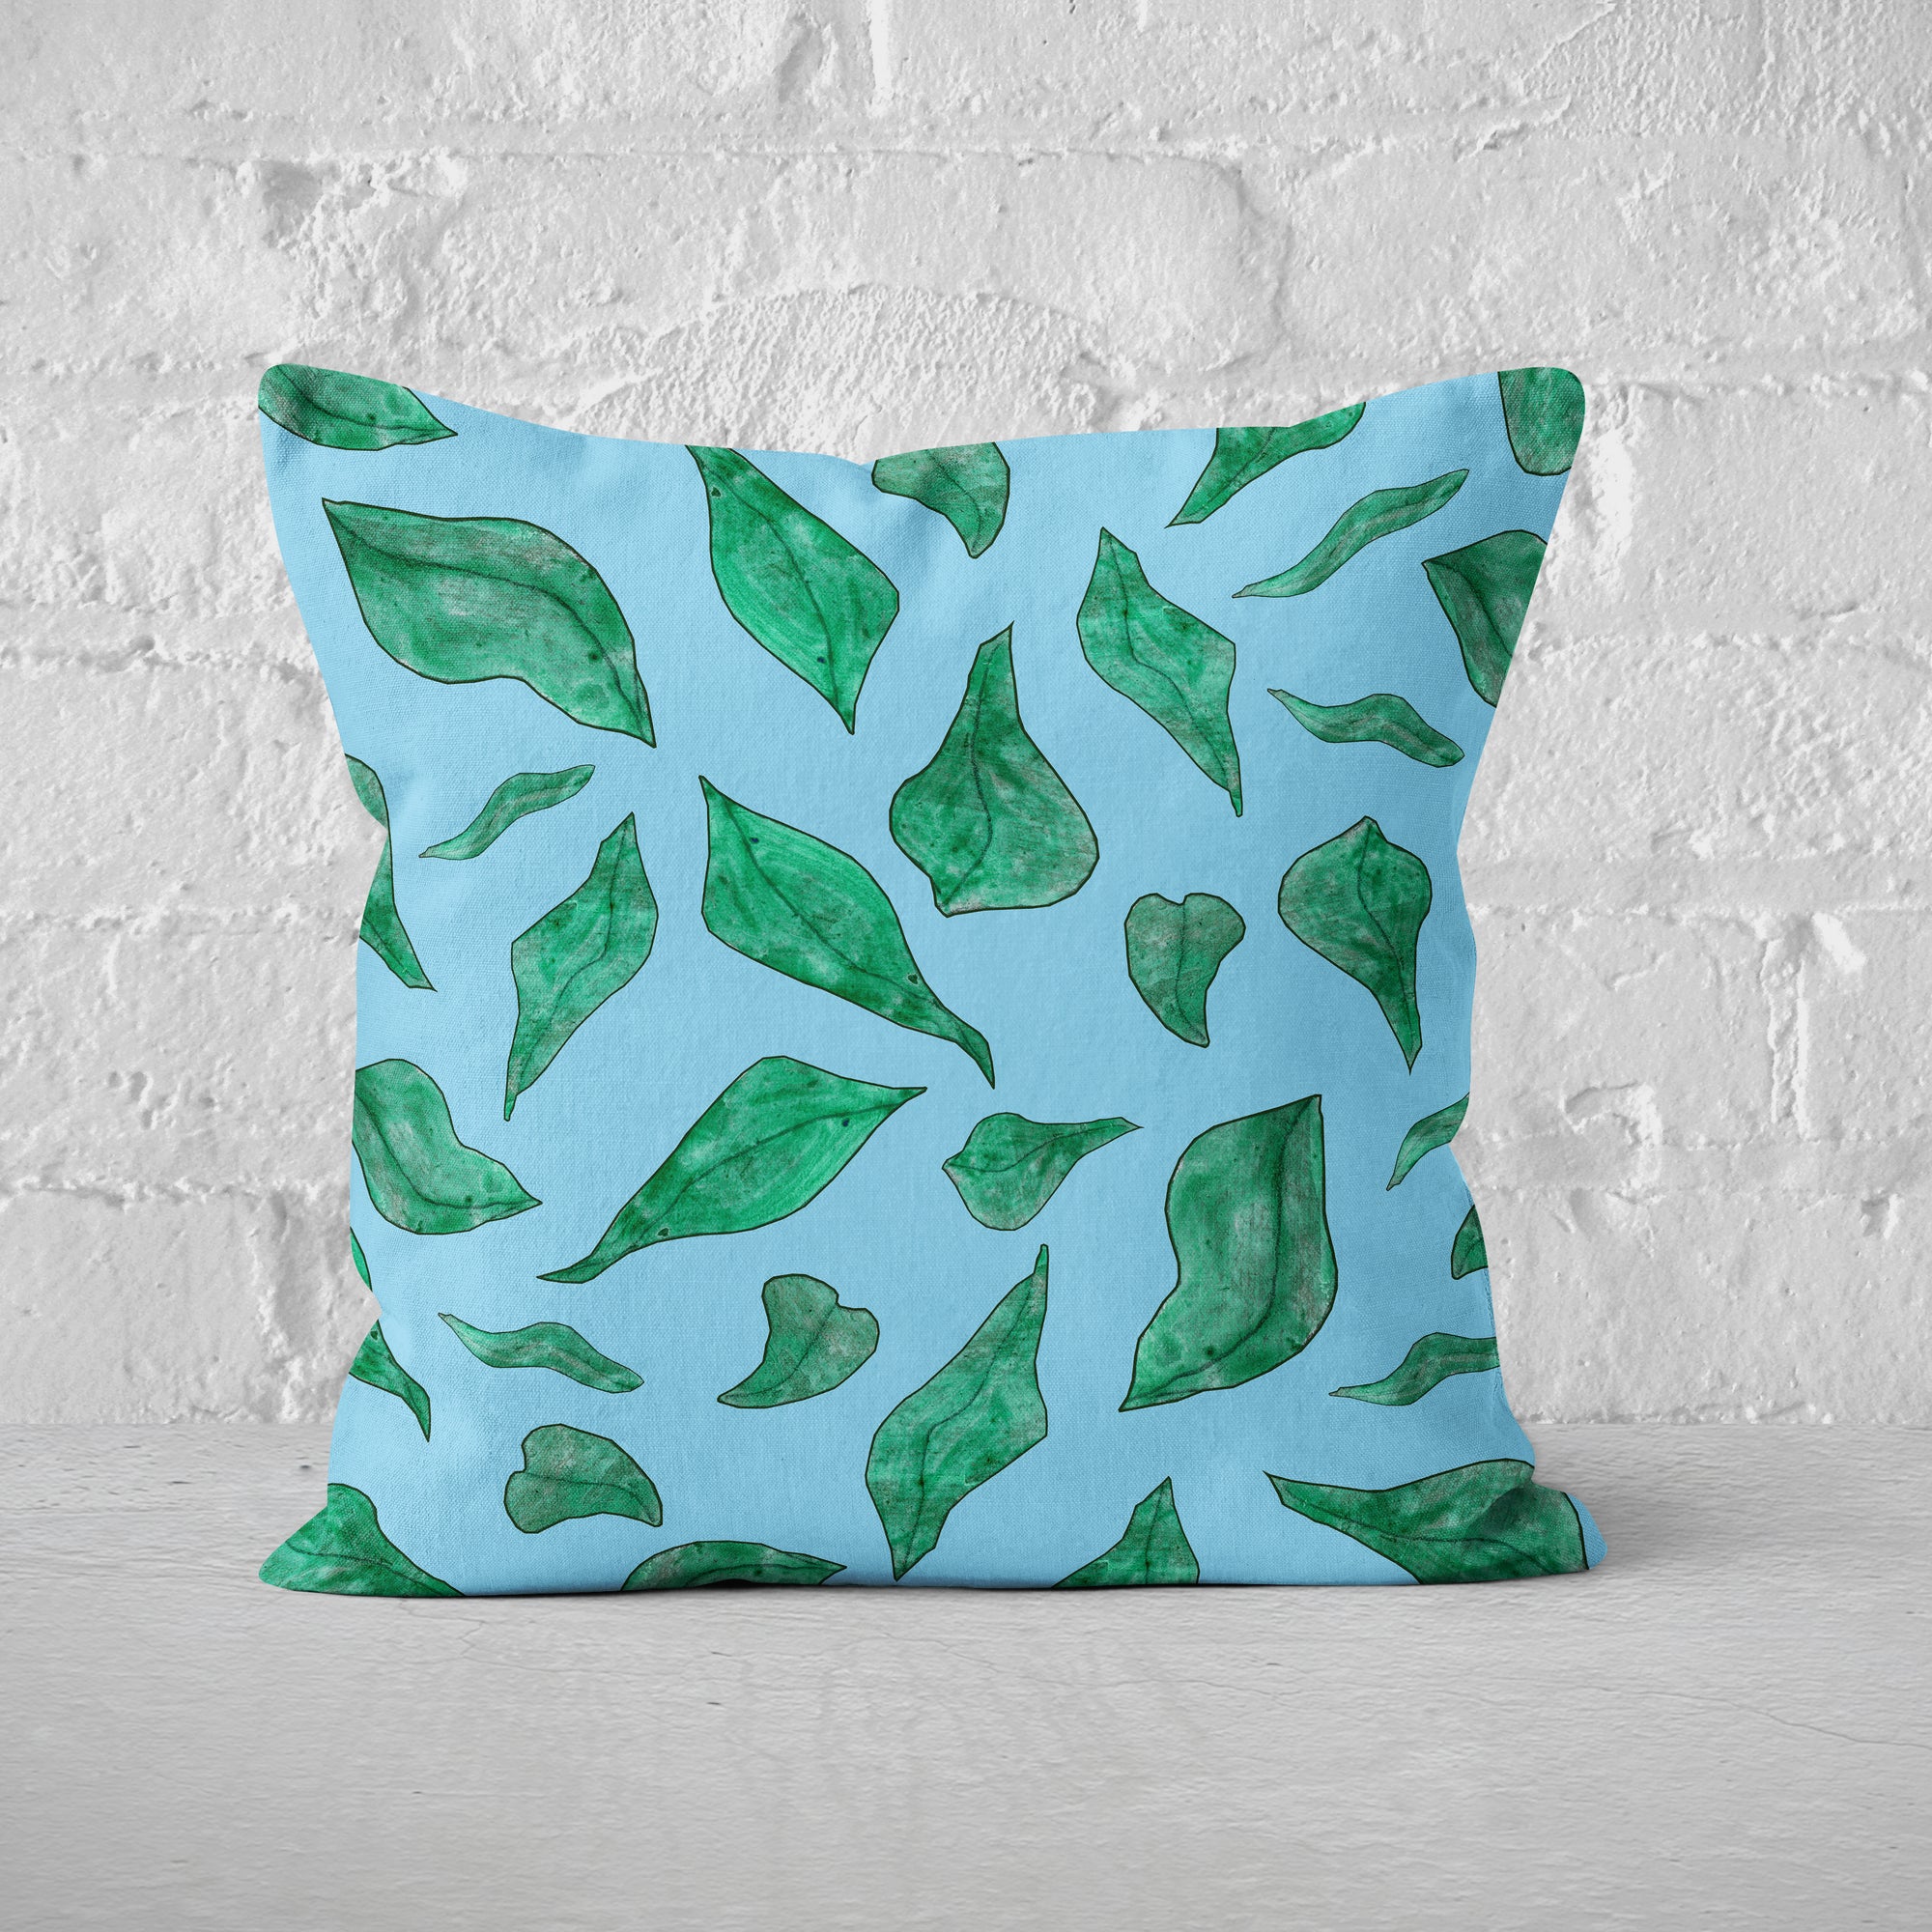 Pillow Cover Feature Art 'Fall' - Blue - Cotton Twill